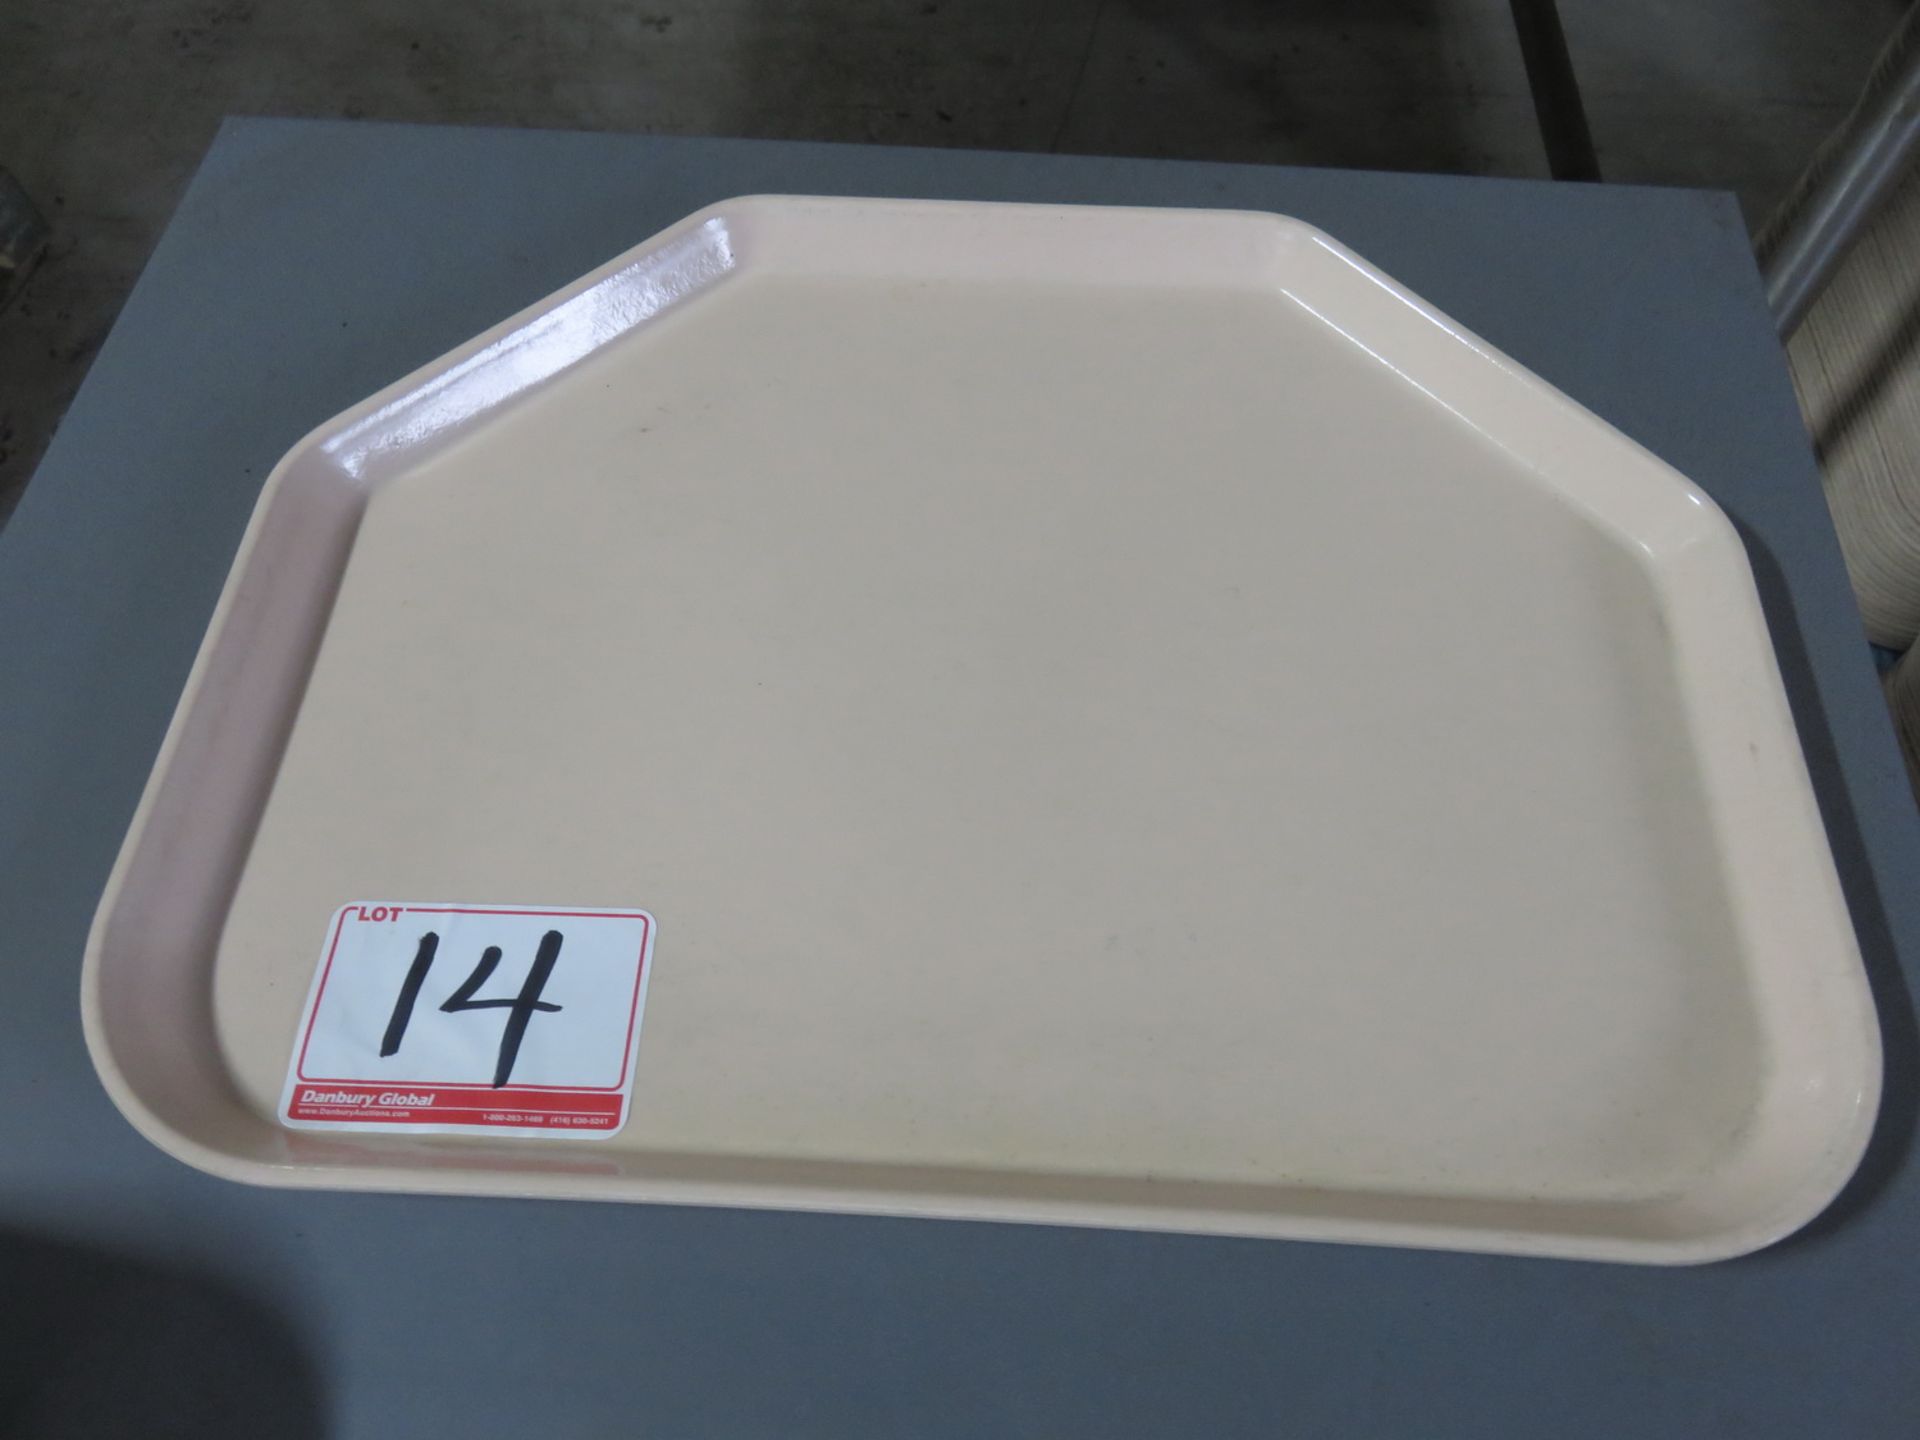 LOT - PINK APPROX 14 X 18" PLASTIC CAFETERIA TRAYS (140 UNITS)